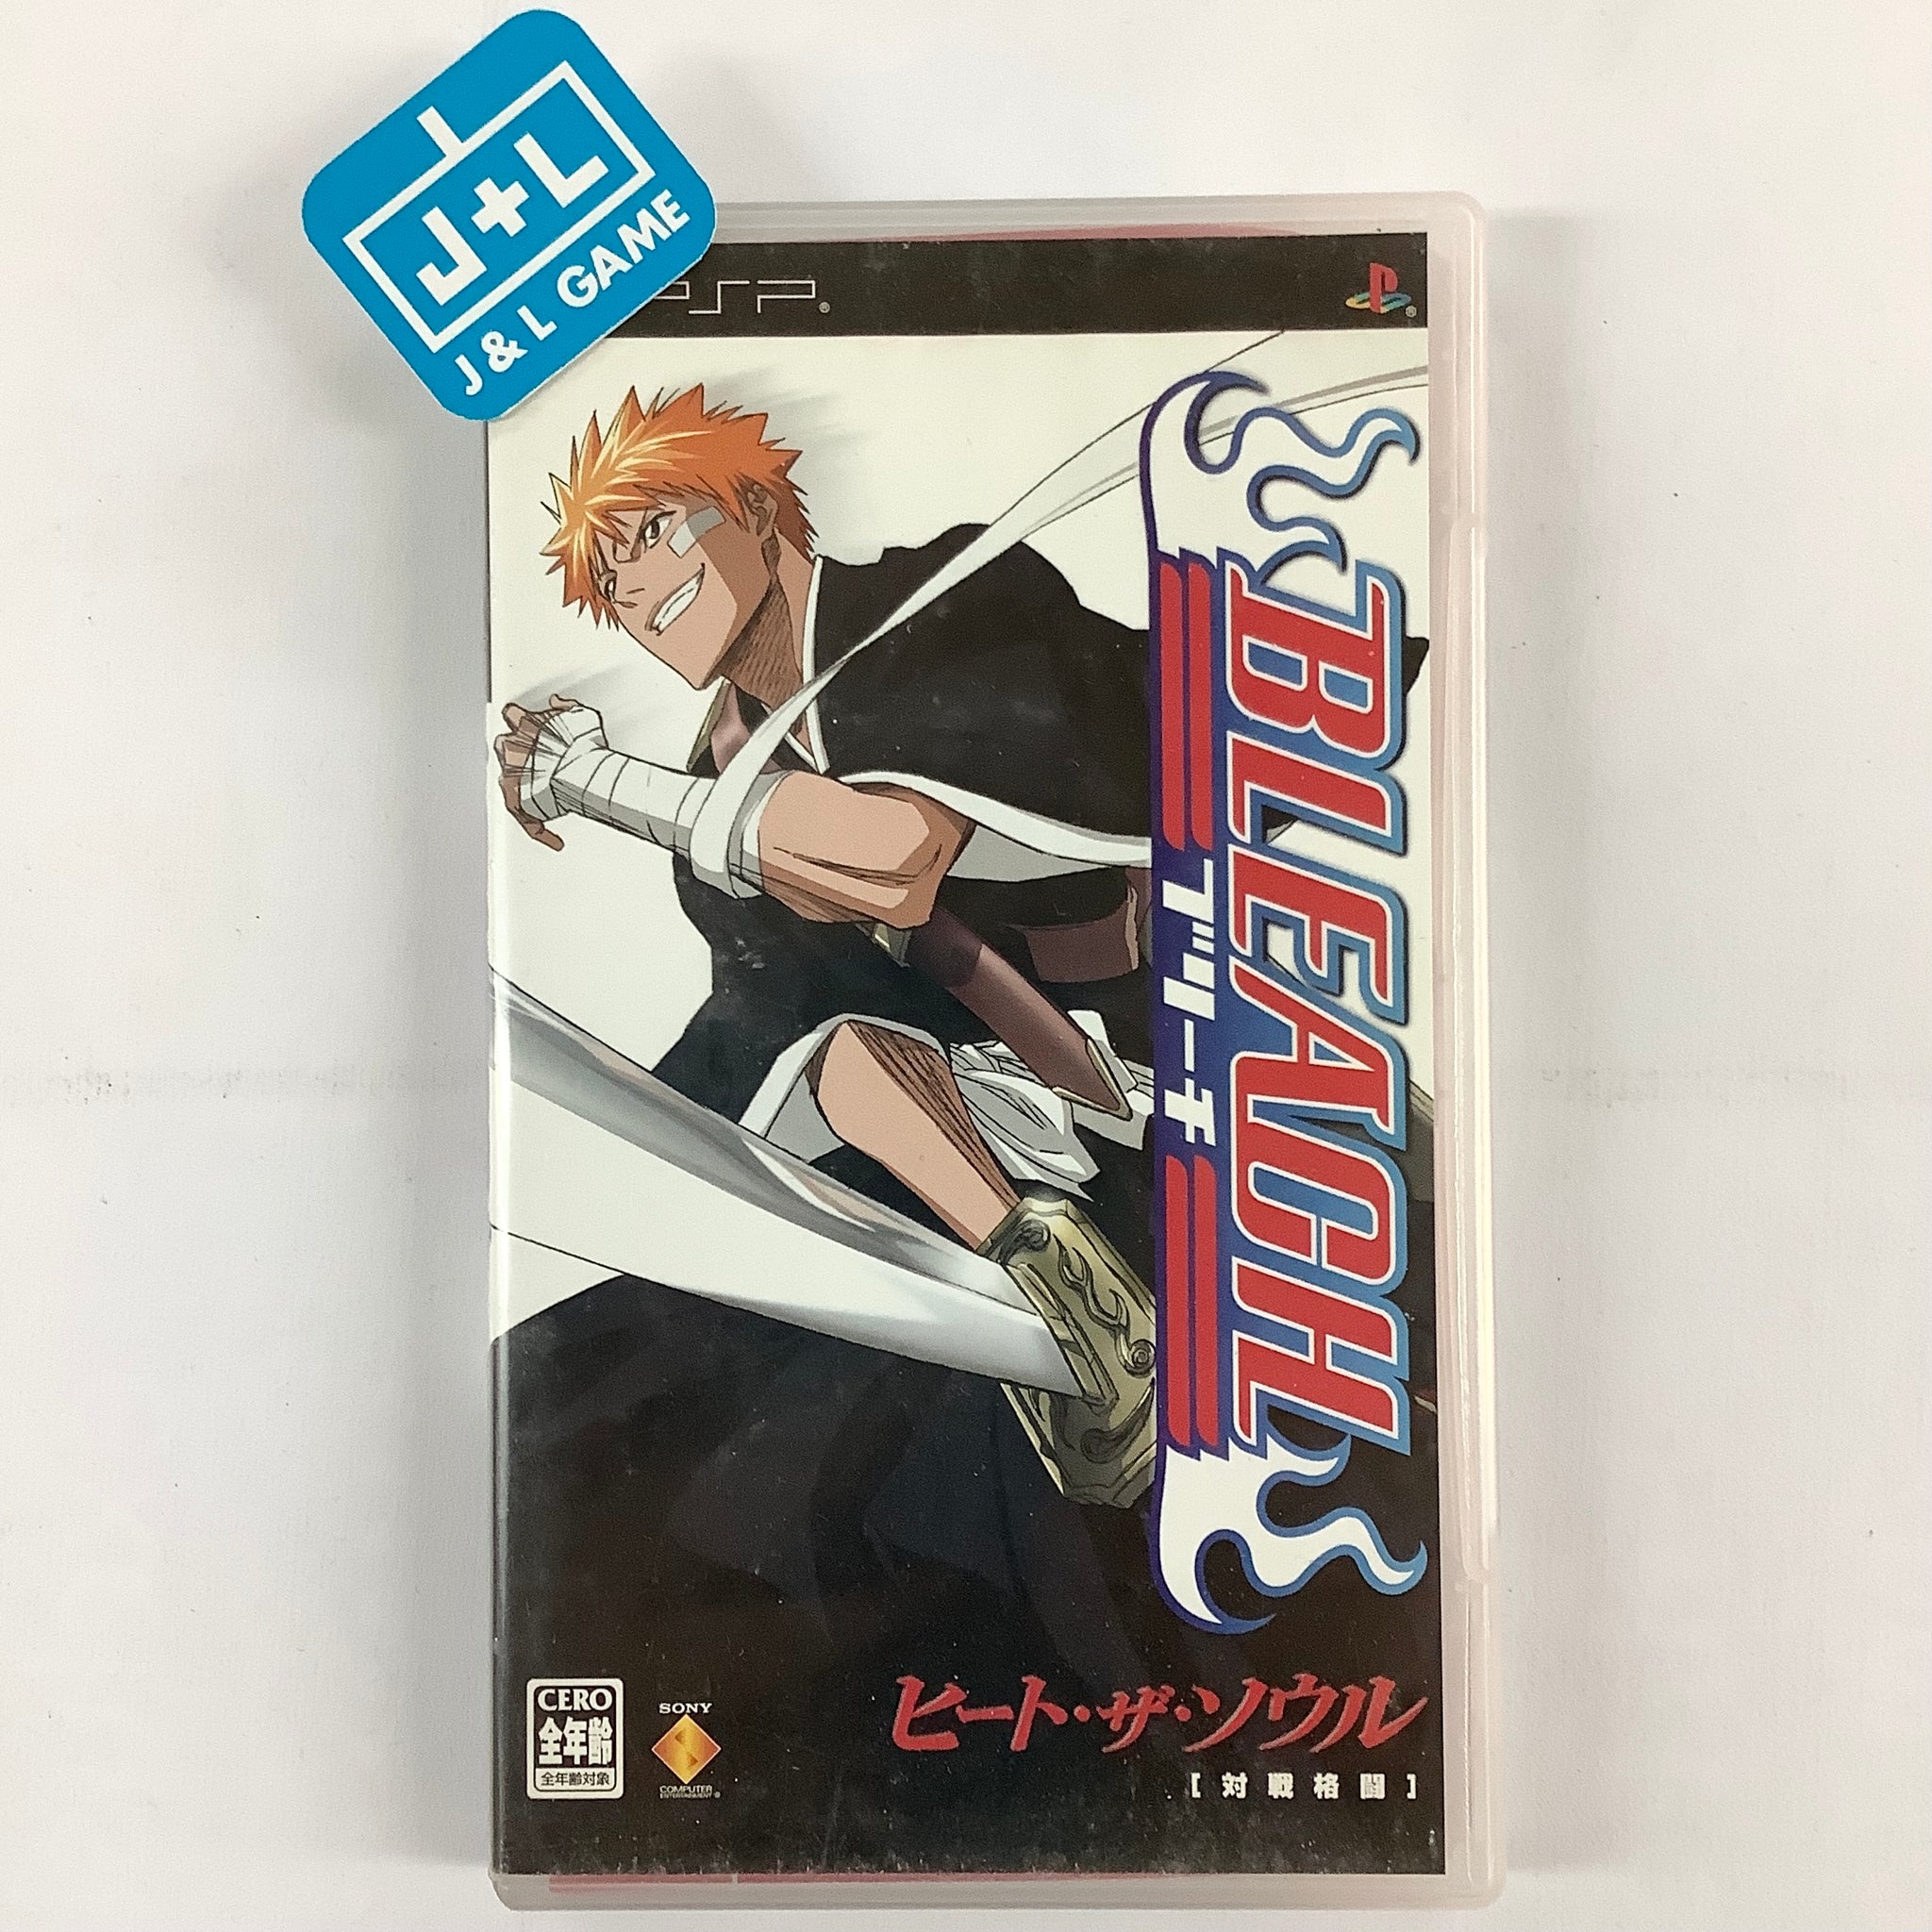 Bleach: Heat the Soul 7 for PSP (Japanese Language Import)